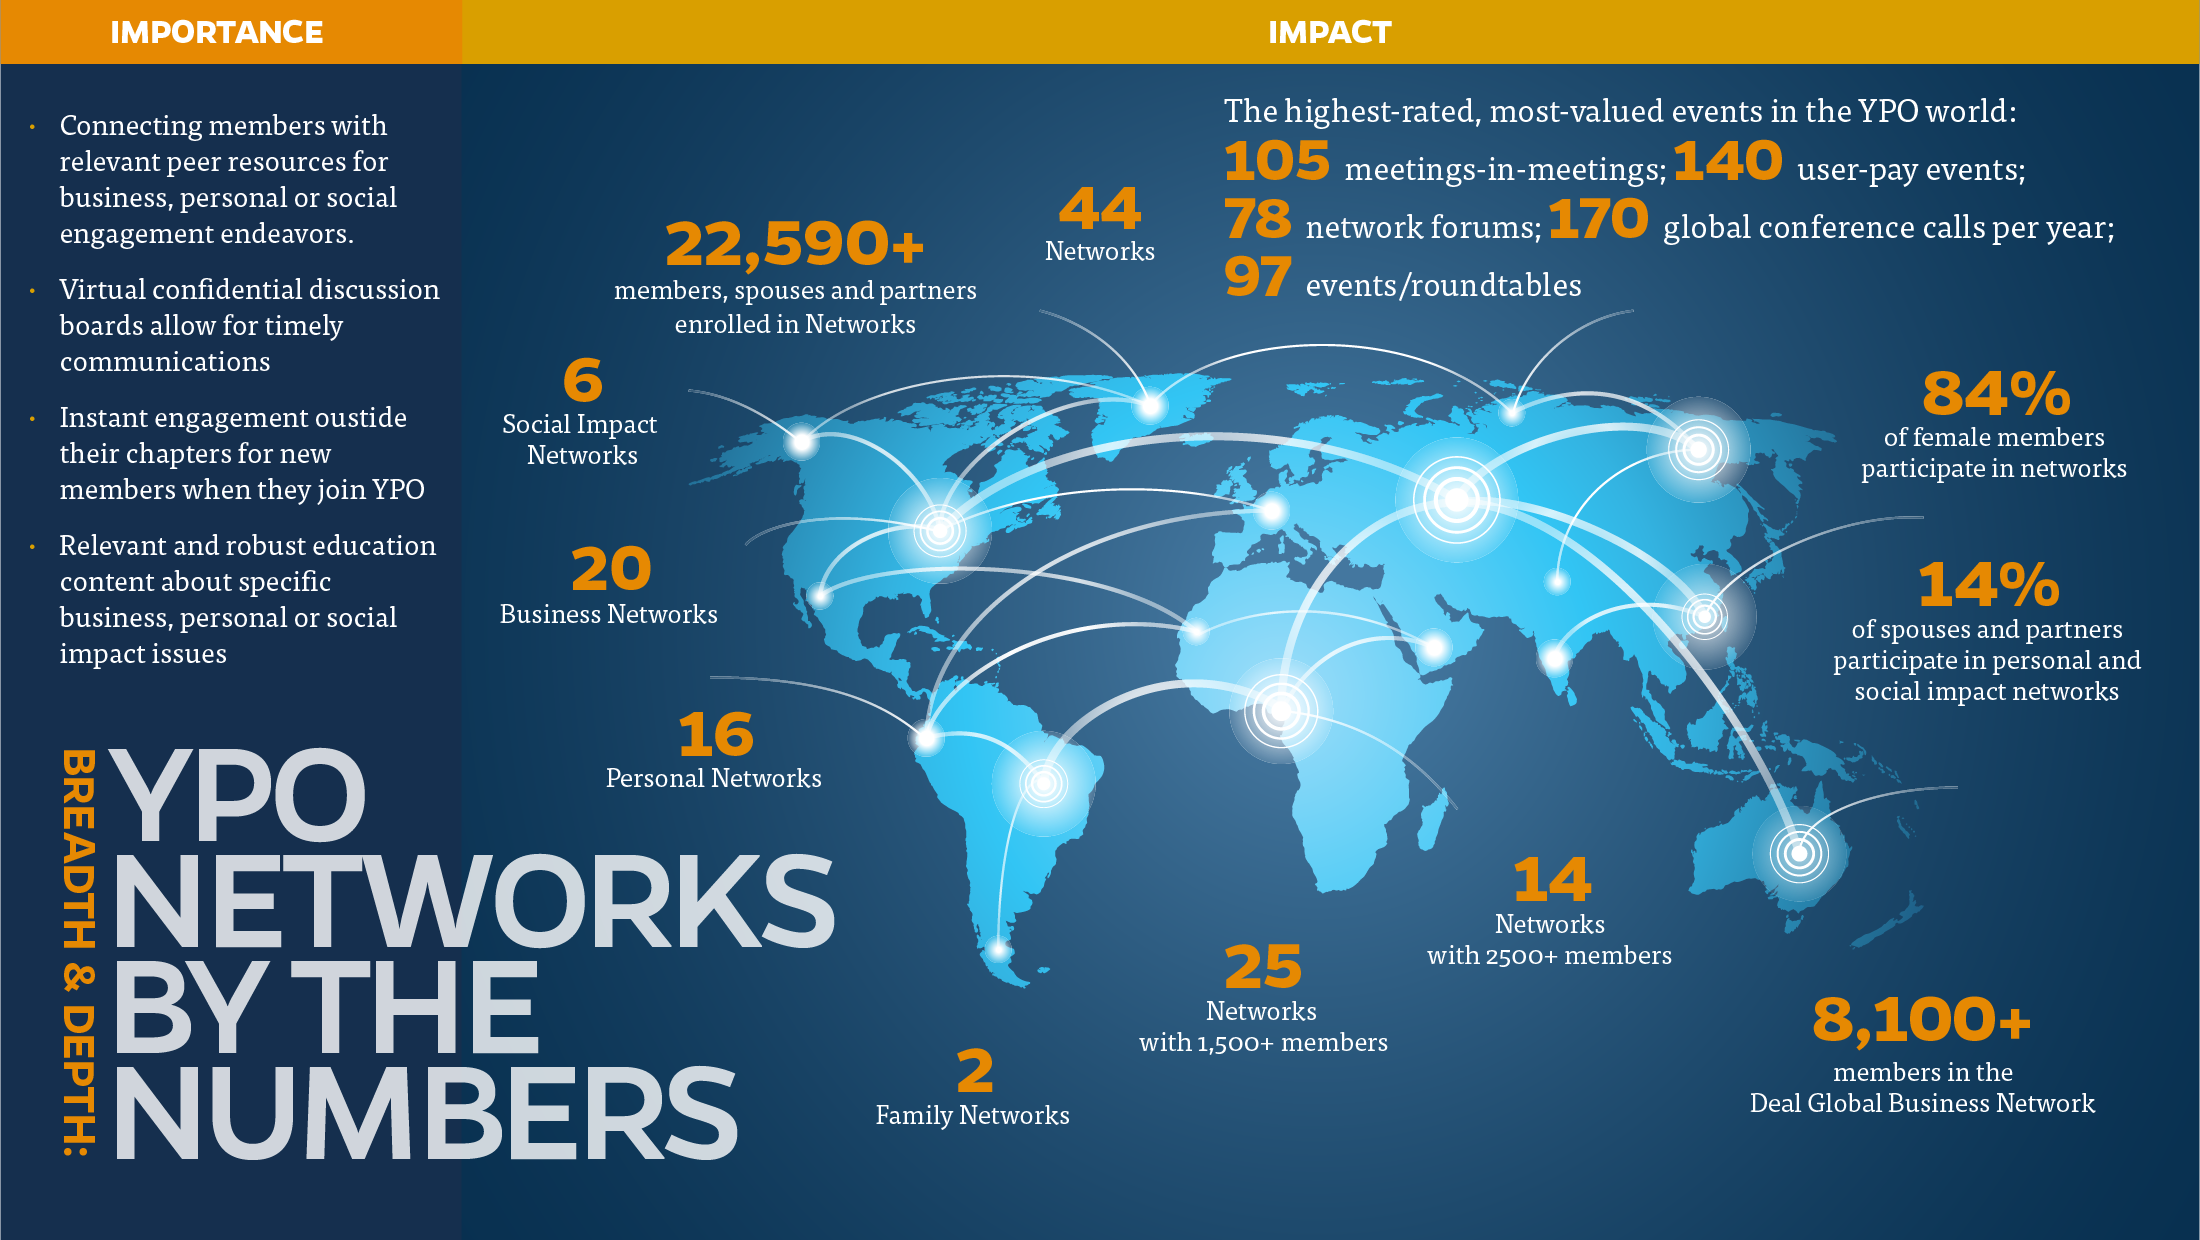 Breadth and Depth: YPO Networks by the Numbers